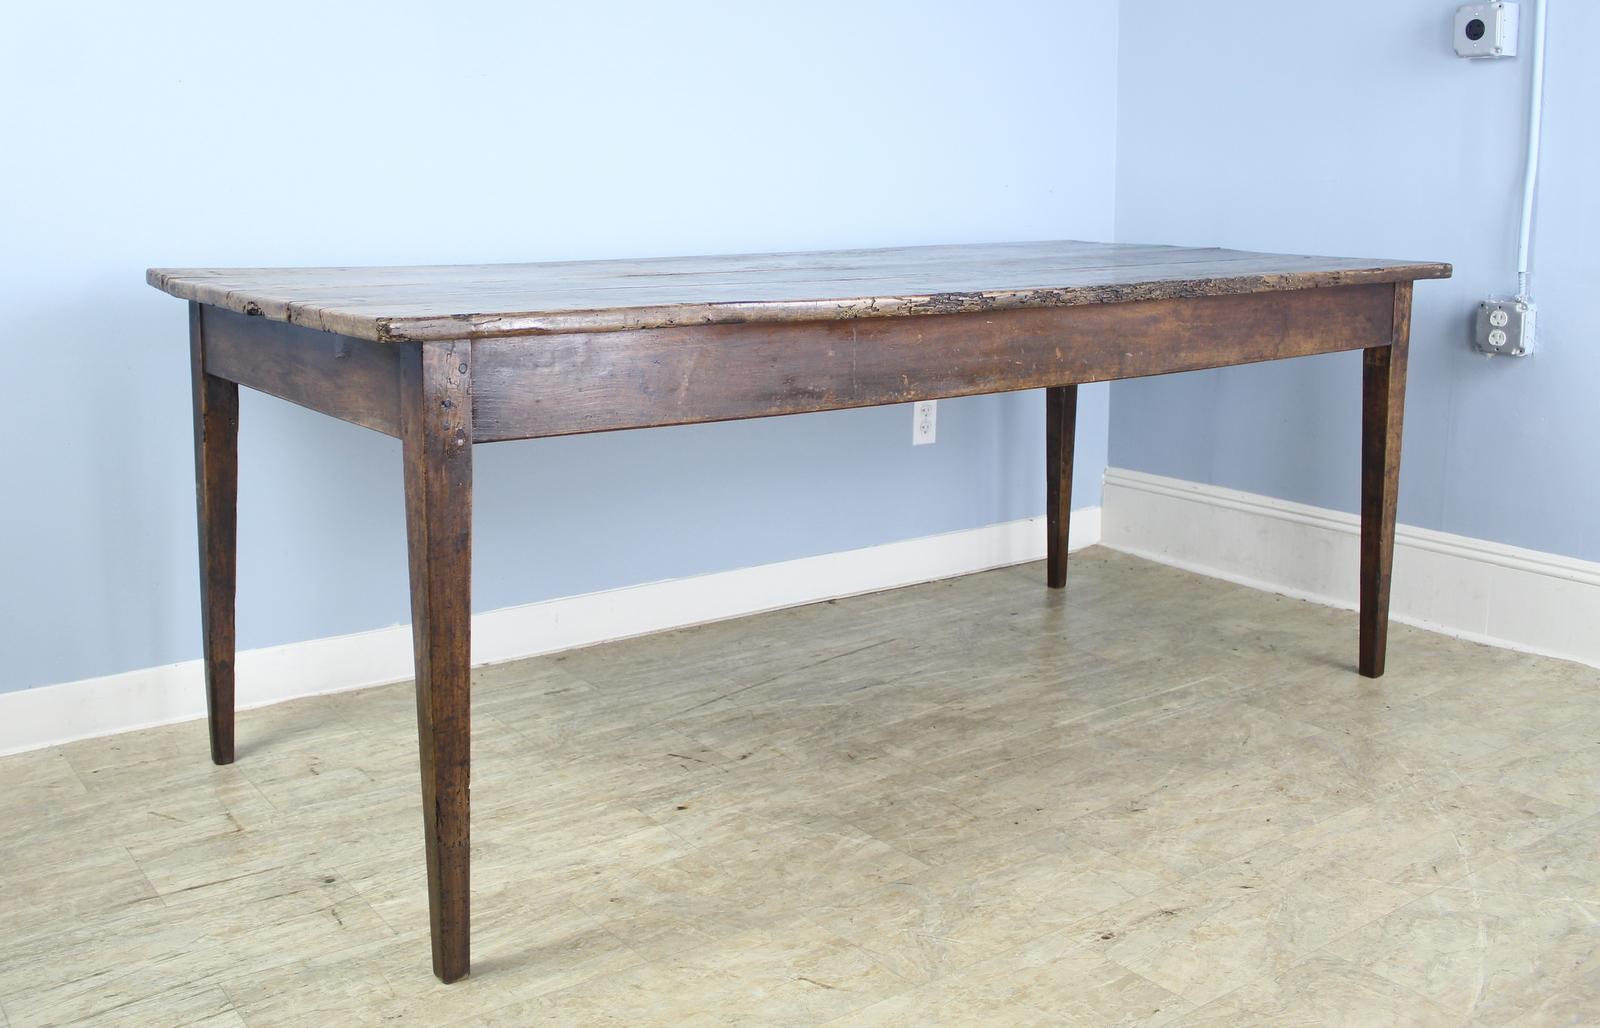 A classic cherry farm table, generously proportioned with unusually good depth for a table of this age. Nice tapered legs and mellow color. The top has dramatic original distress which adds a strong note of interest, shown in several of the